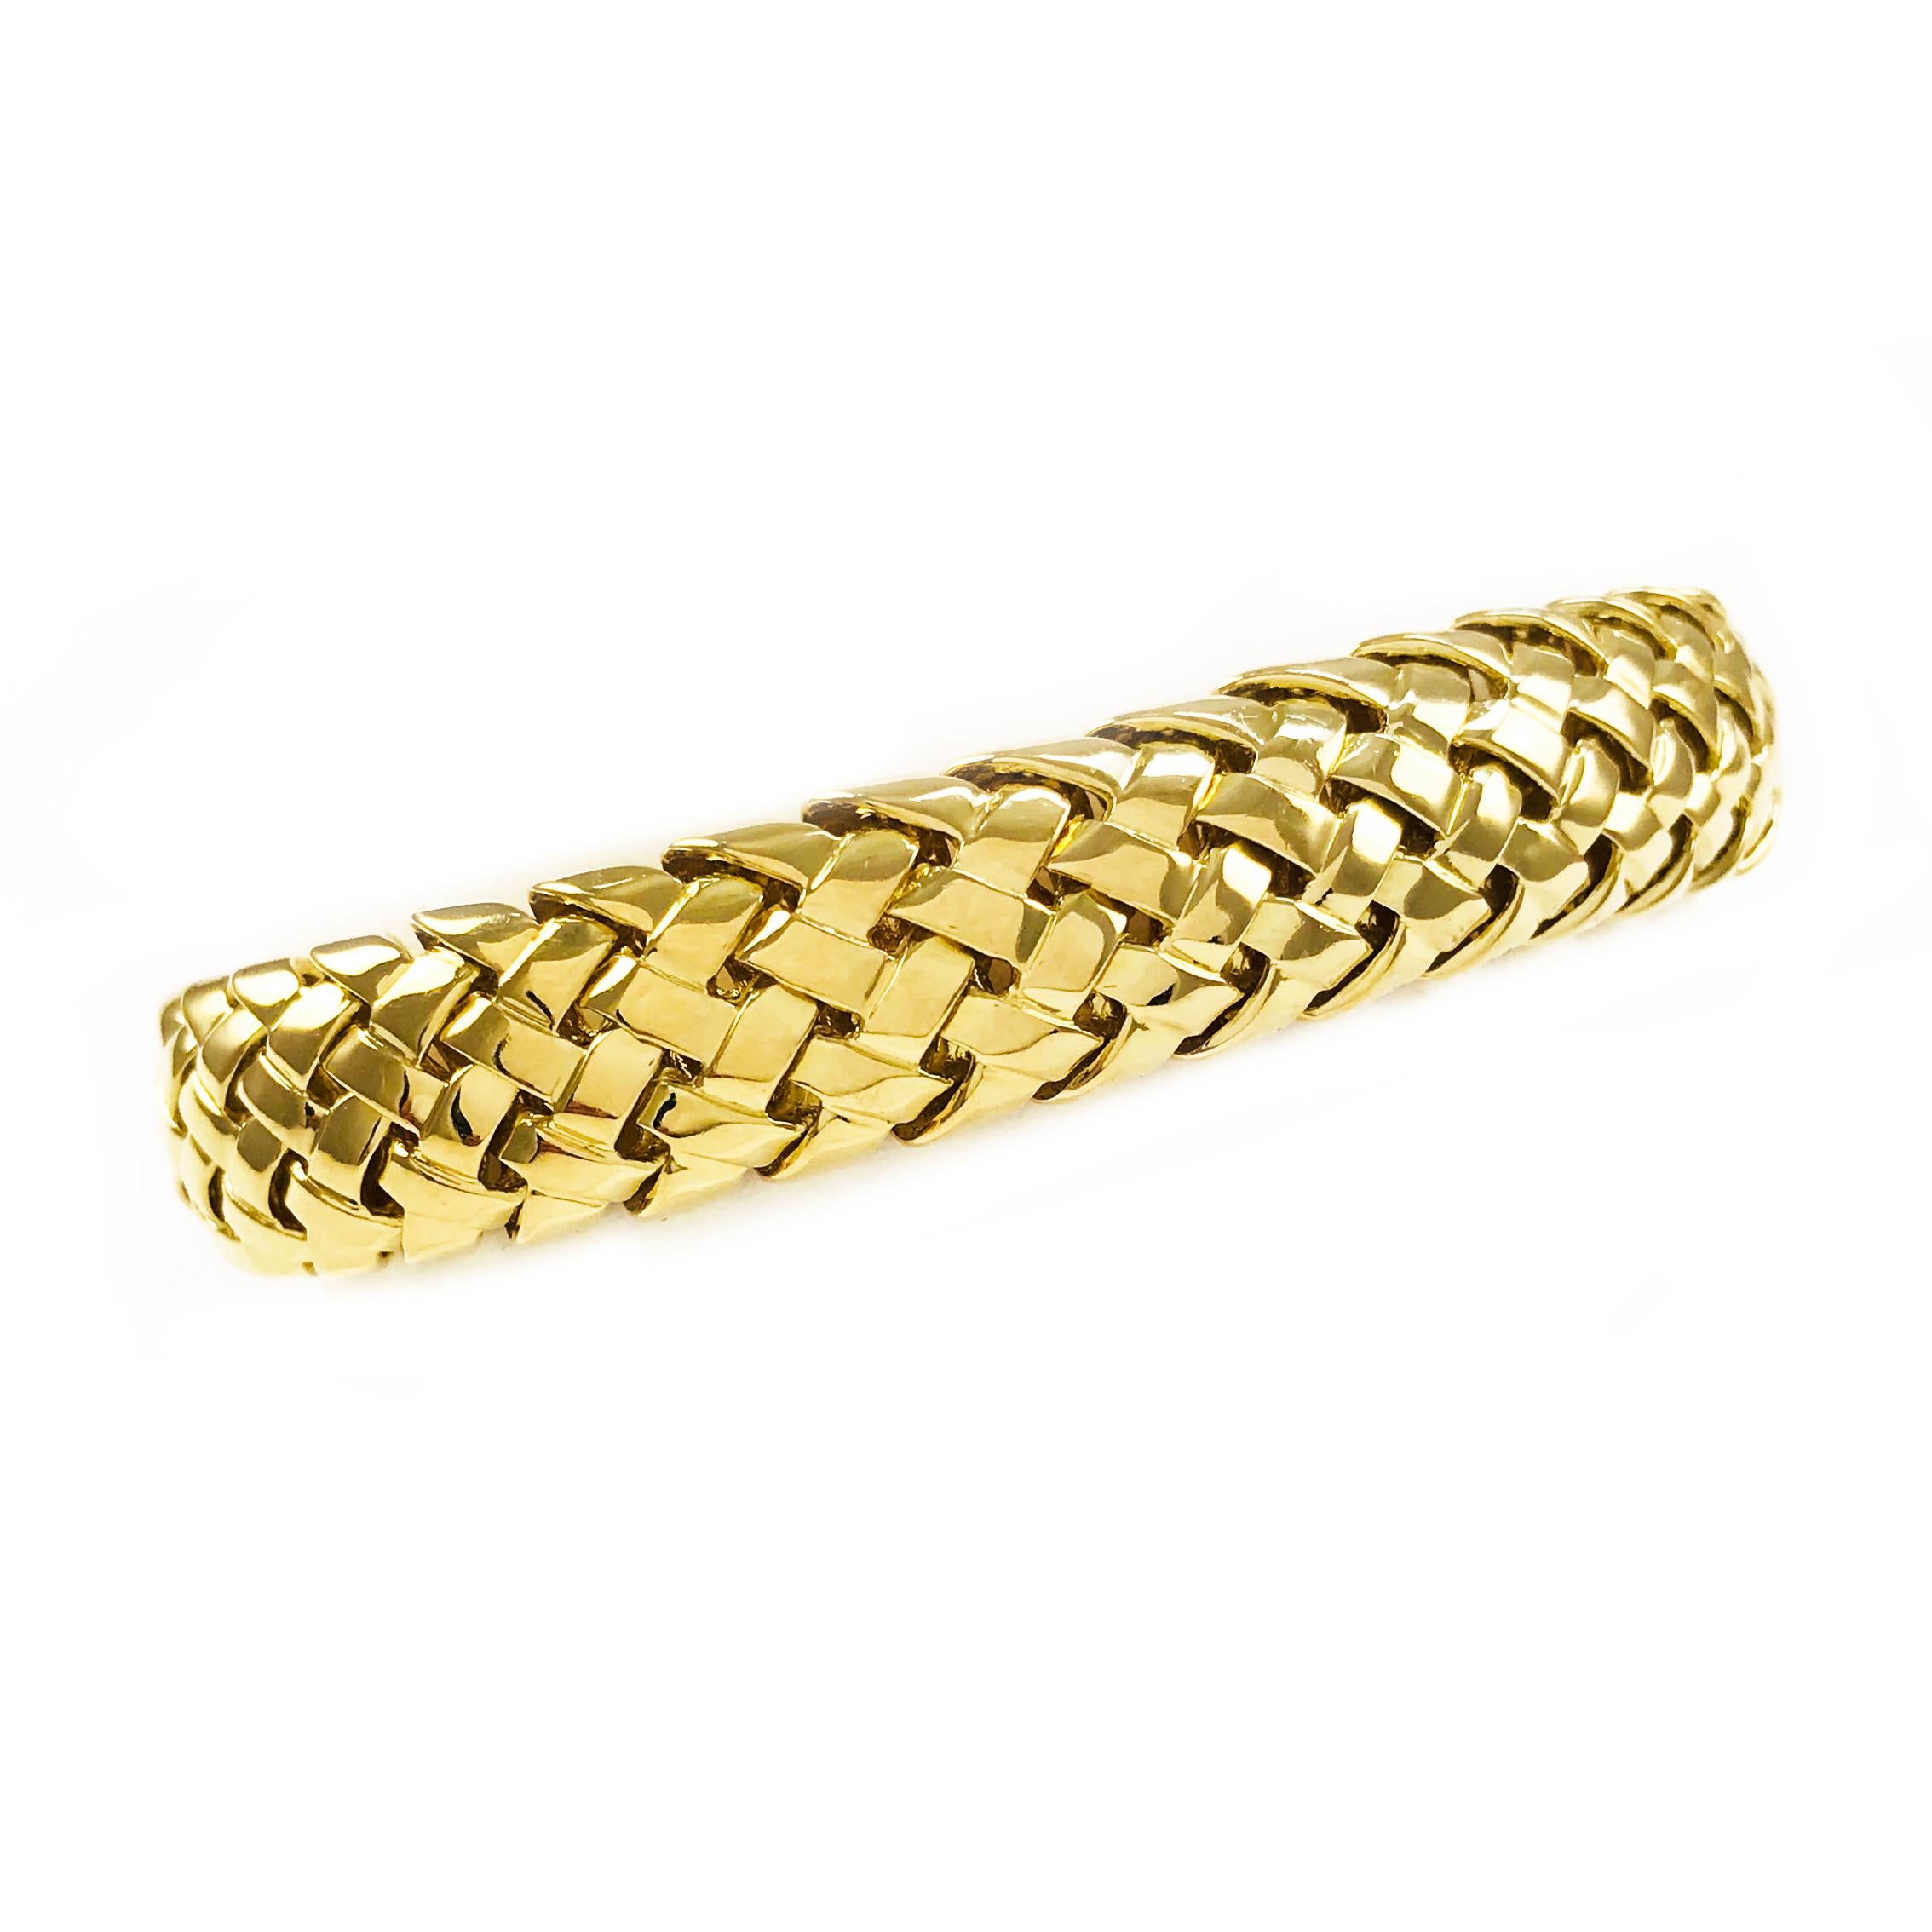 Tiffany & Co. 18 Karat Yellow Gold Vannerie Bracelet. Lovely heavyweight basket weave bracelet with clasp closure. Stamped on the inside clasp is Tiffany & Co. 750 © 1995.  7 inches in length. 